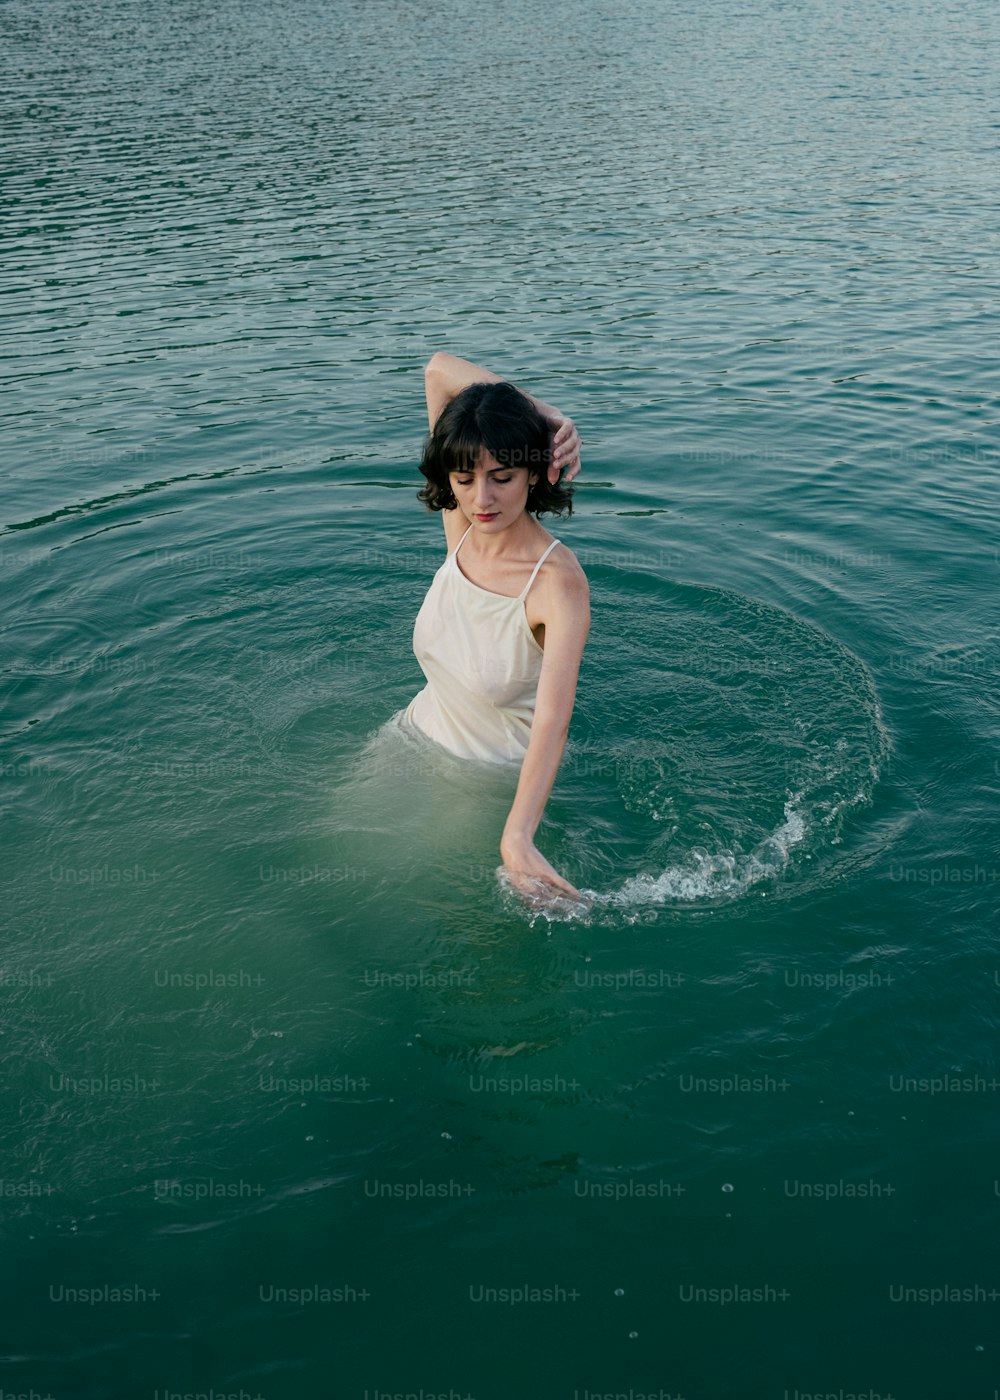 a woman in a body of water wearing a white dress